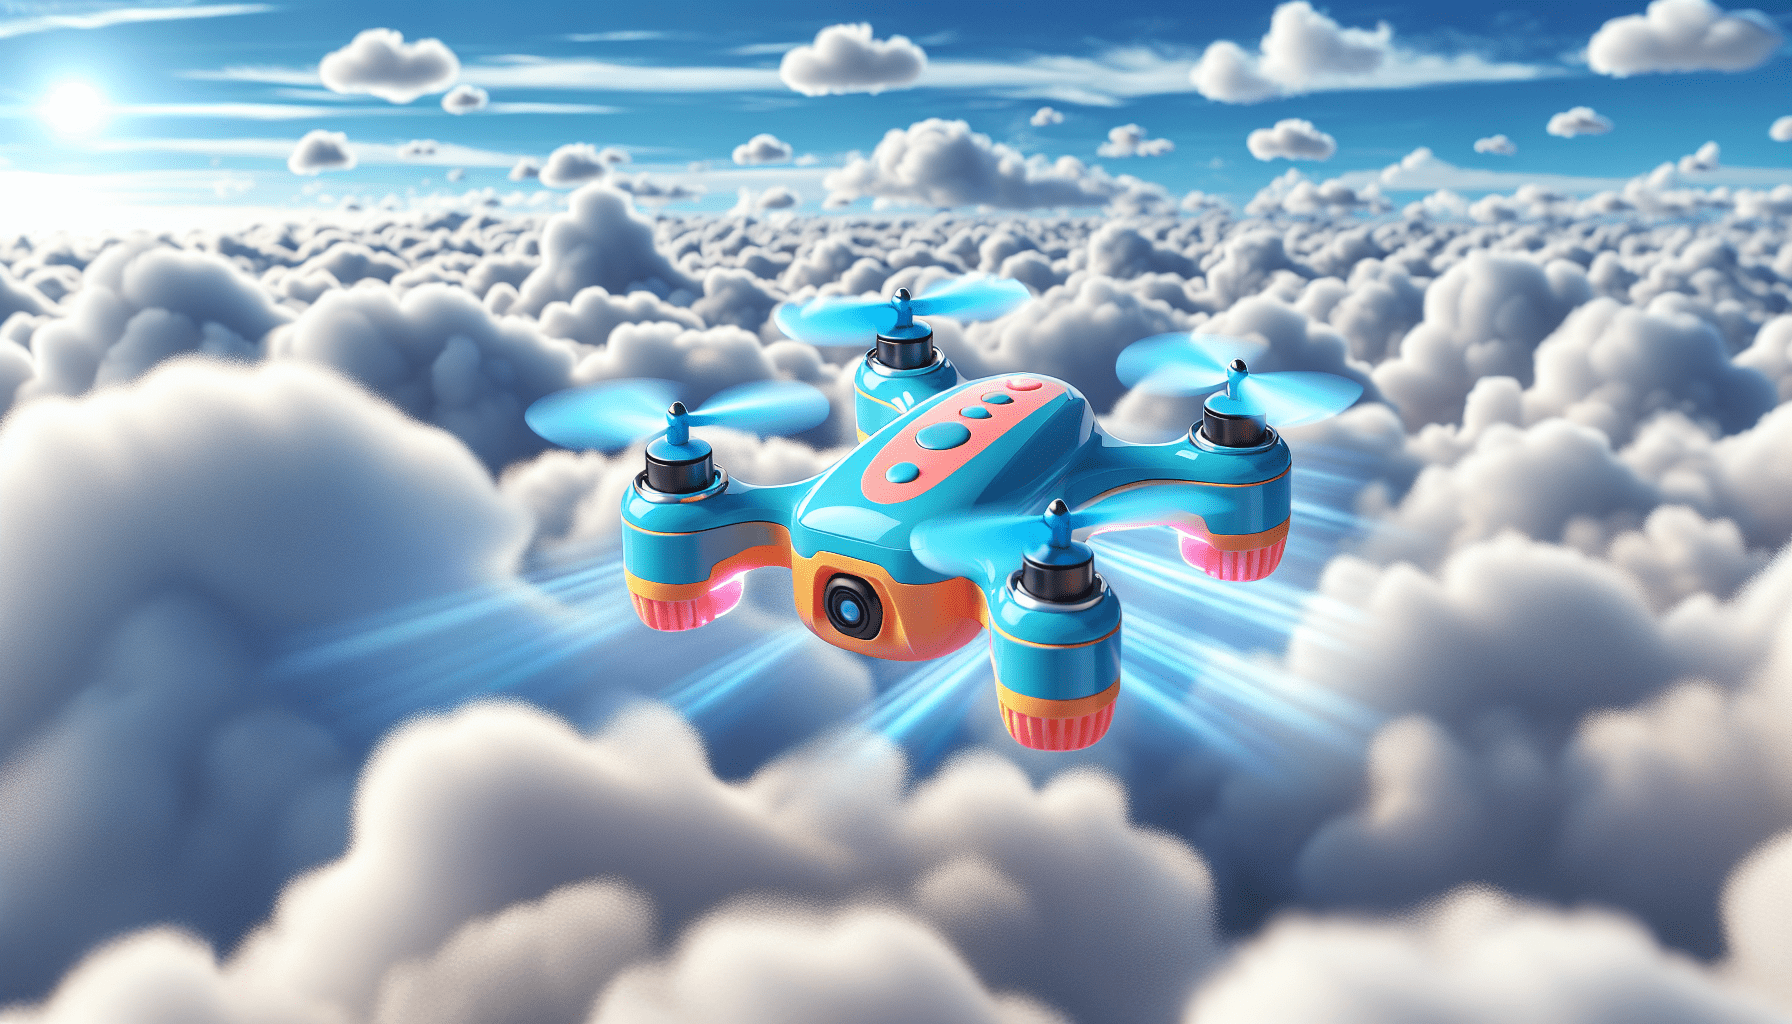 Which Is The Best Drone For Children?